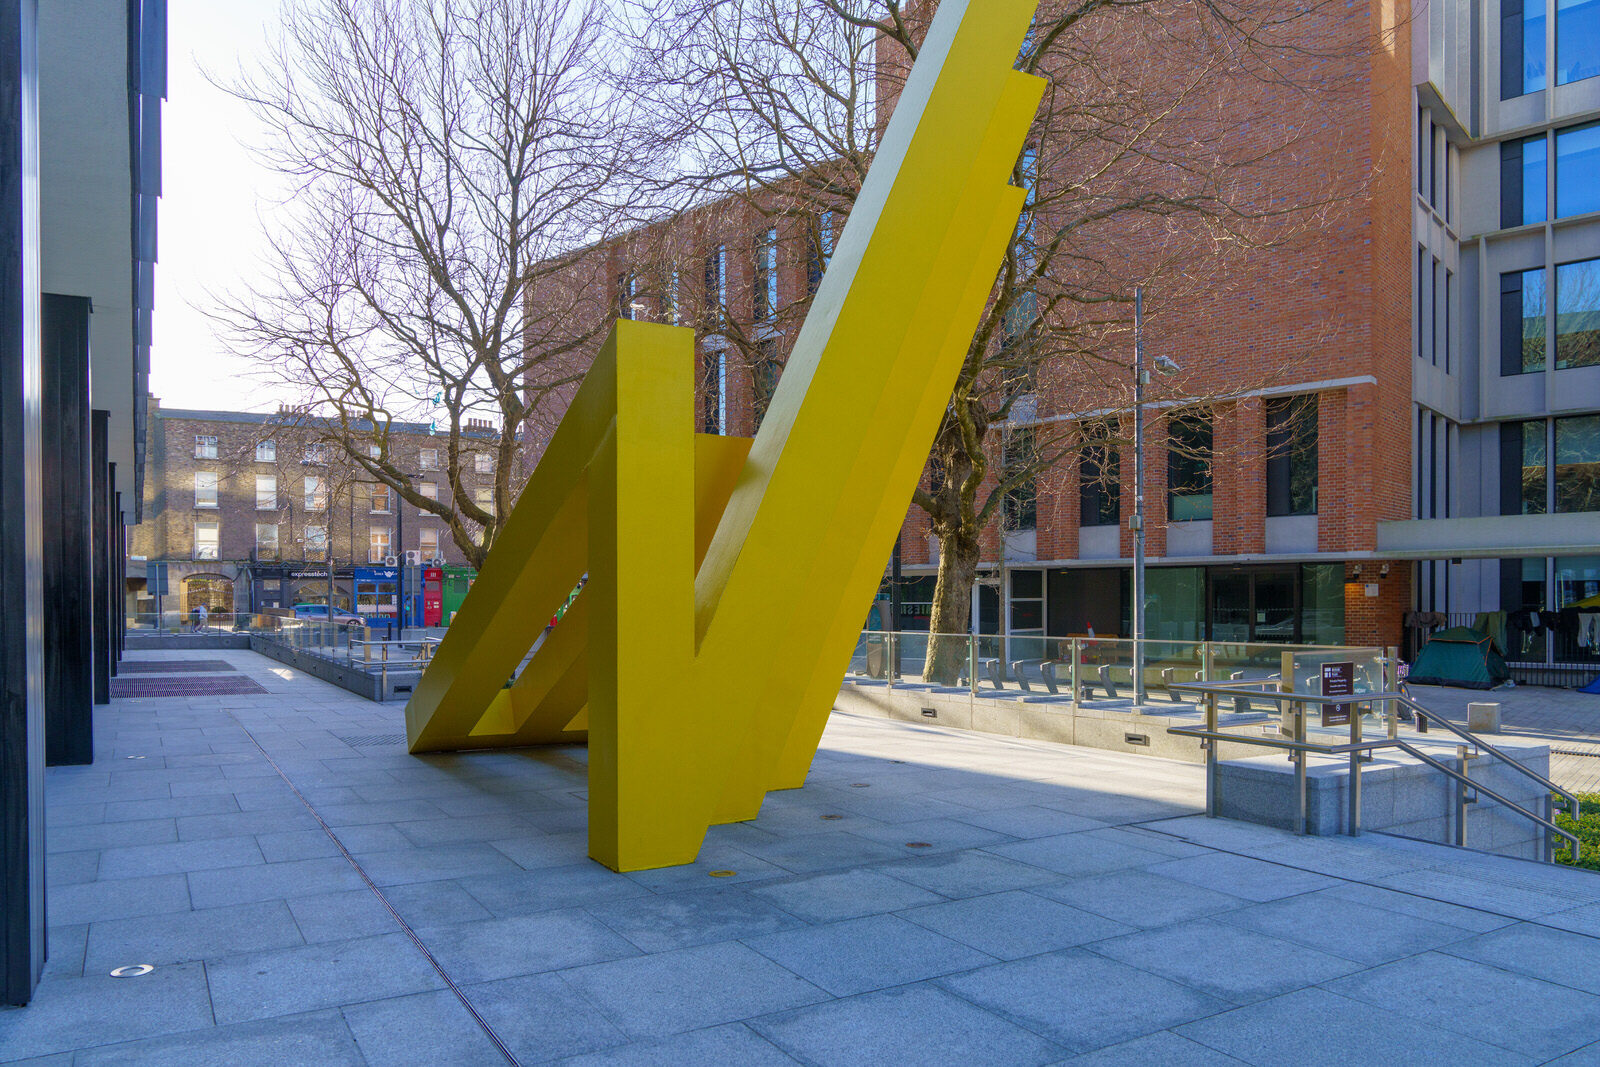 SCULPTURE BY MICHAEL BULFIN AT MIESIAN PLAZA [YELLOW STEEL GEOMETRIC REFLECTIONS]-227866-1